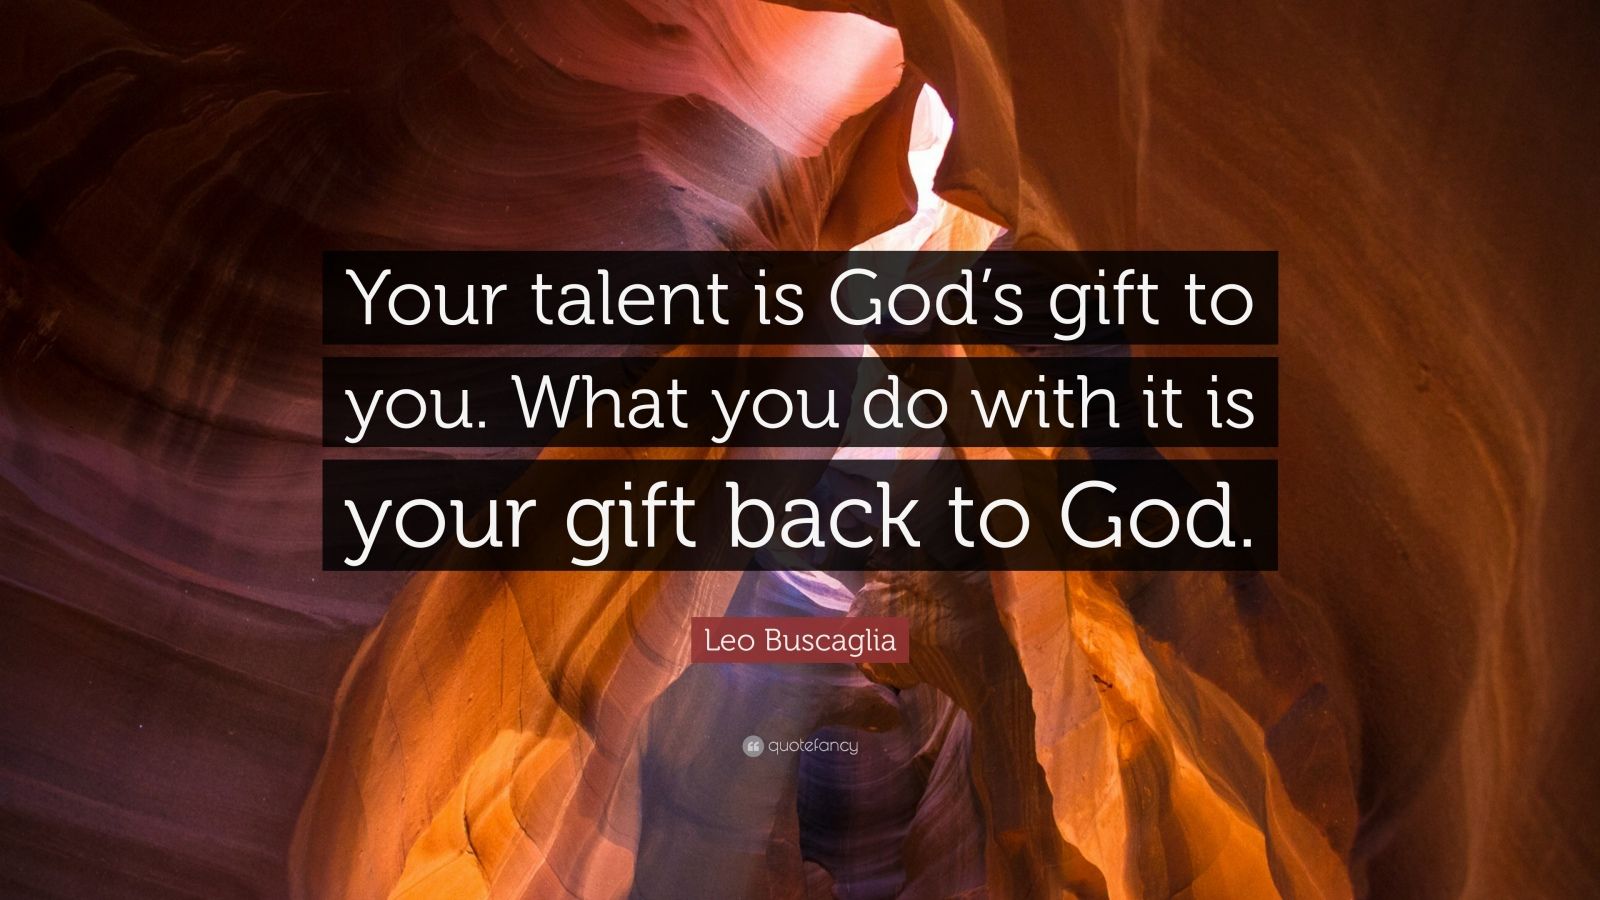 Leo Buscaglia Quote “Your talent is God’s gift to you